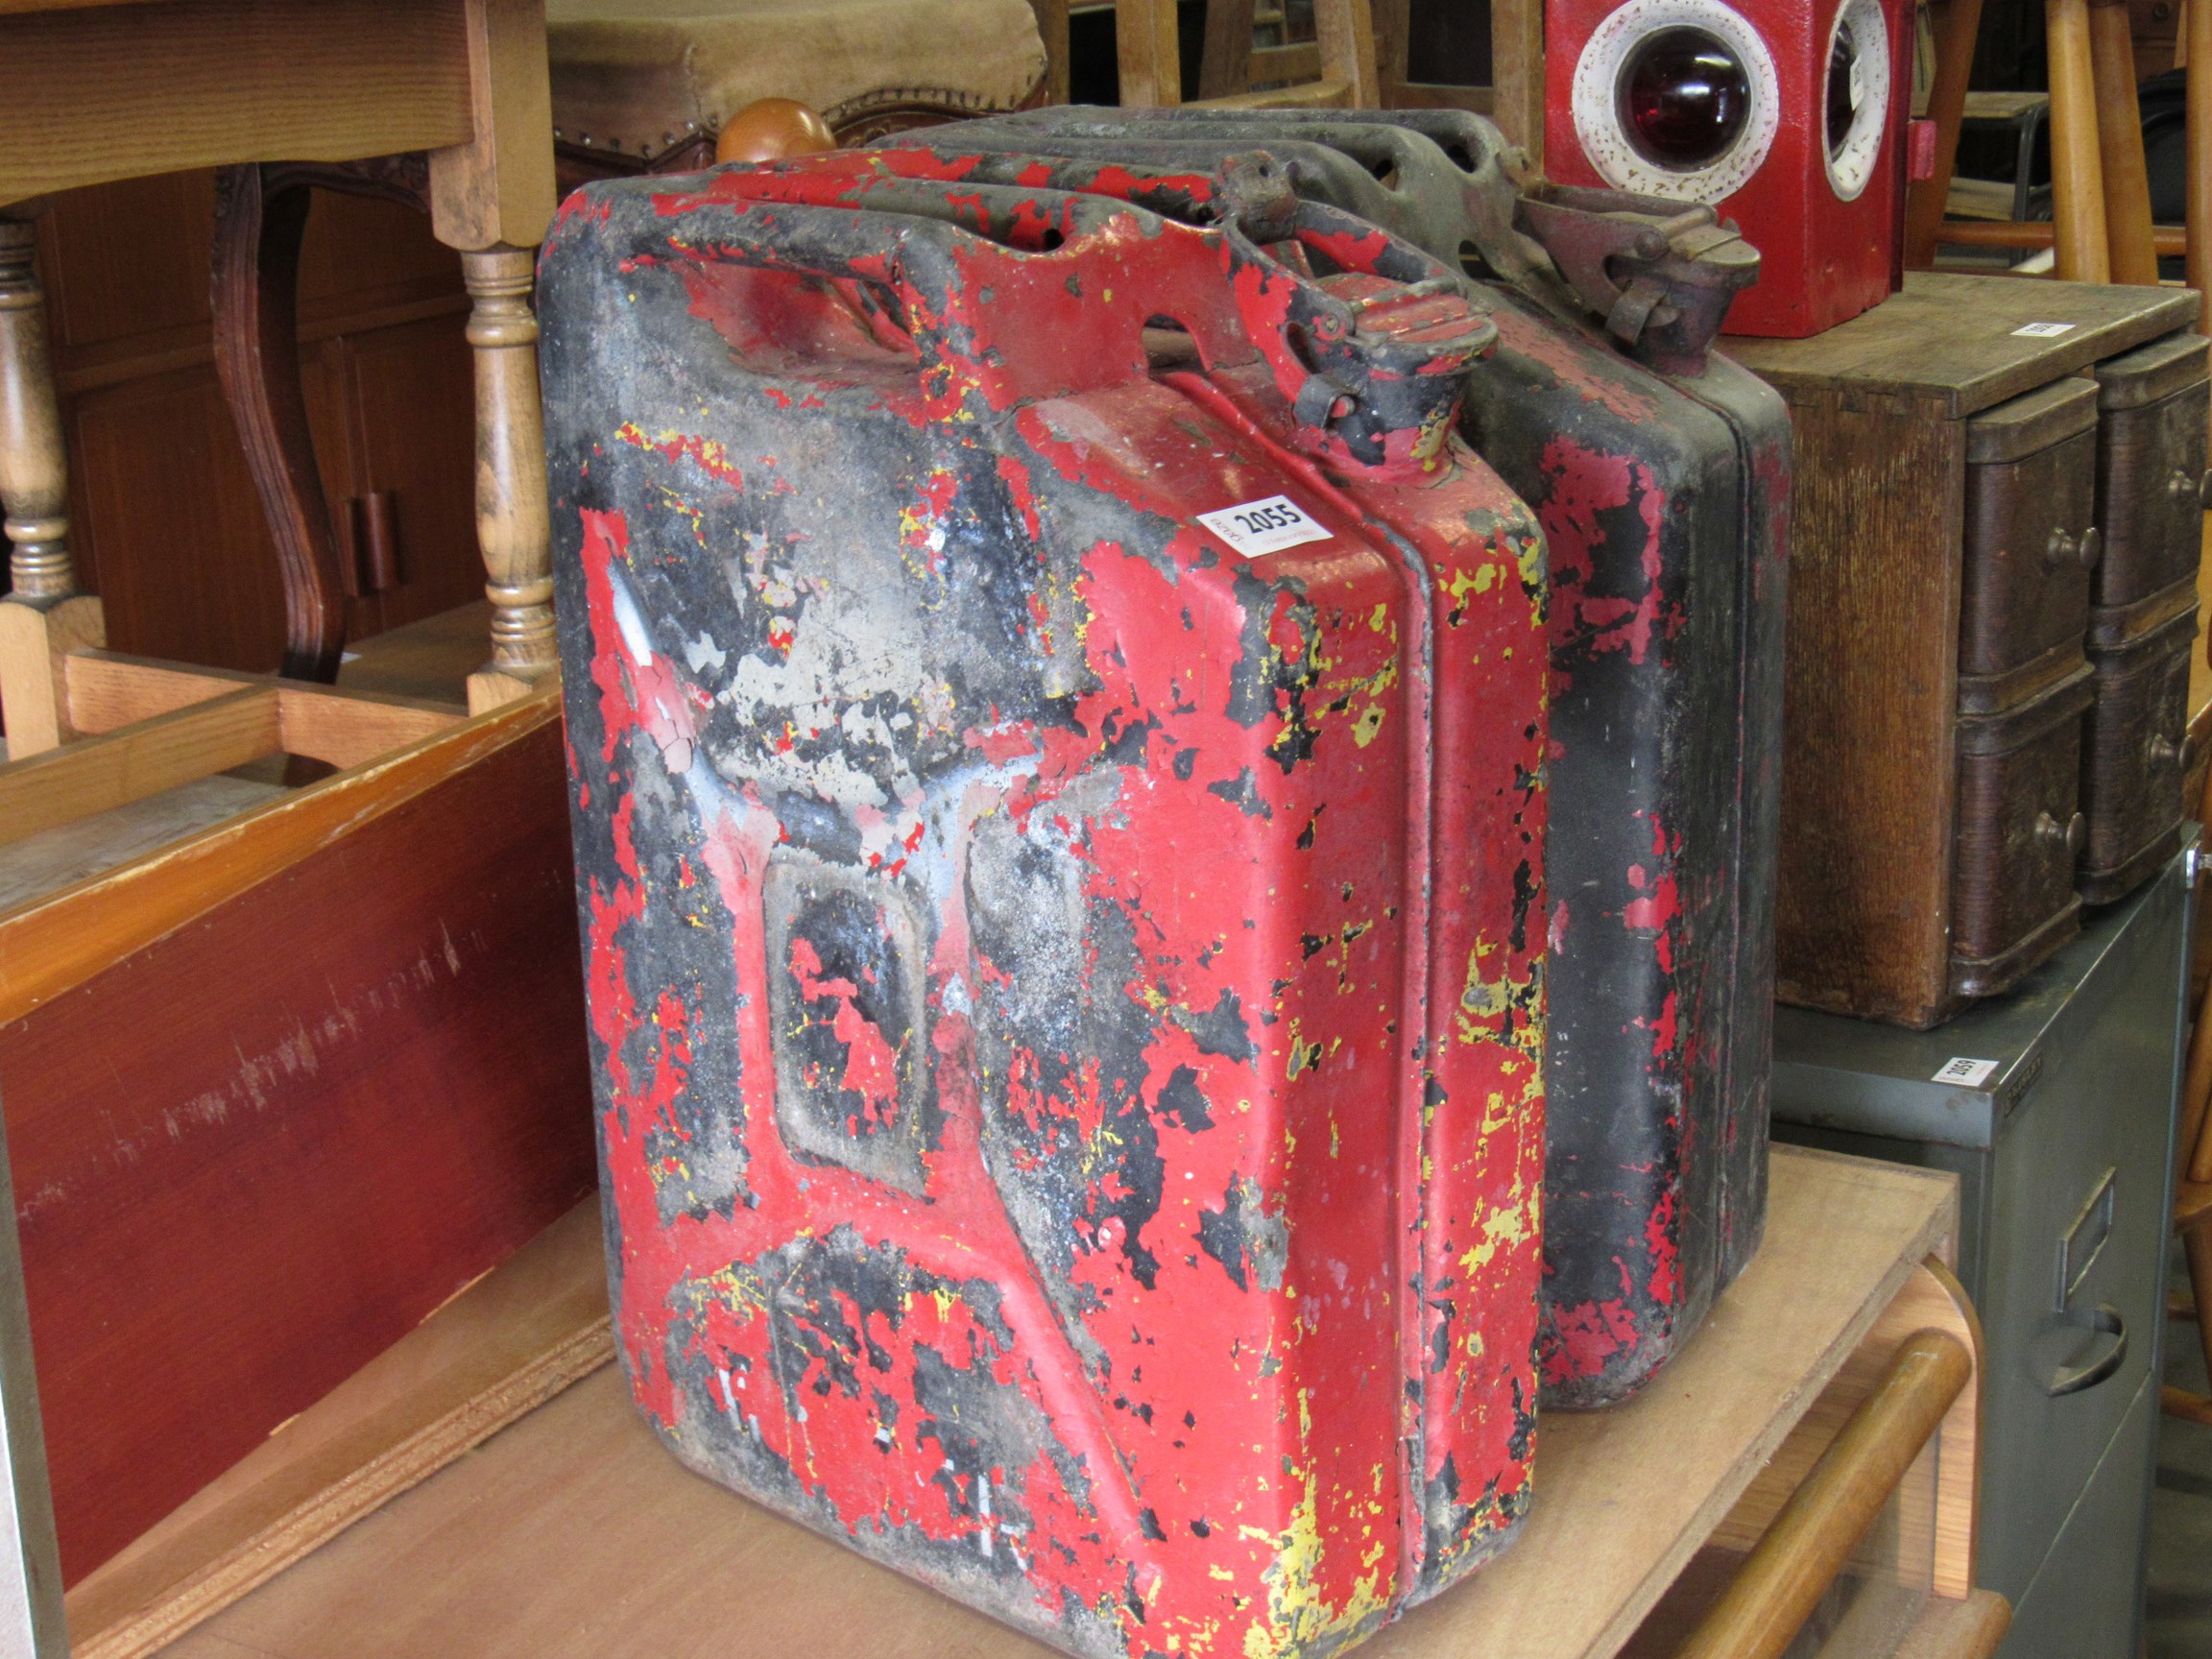 Two 1950's War department Jerry cans with worn paintwork